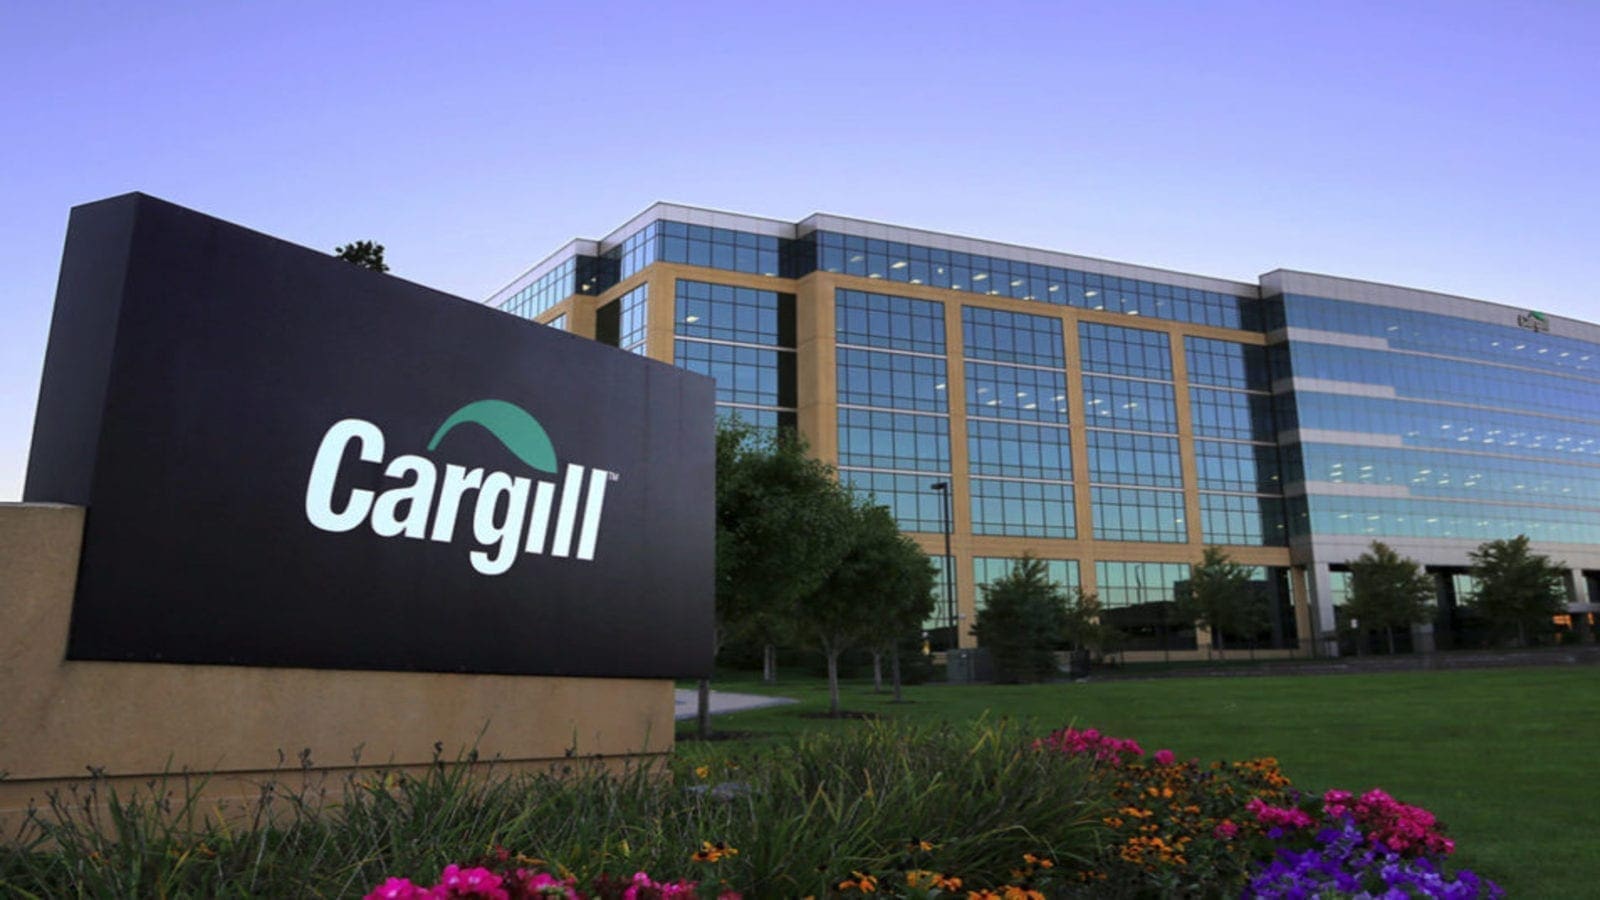 Executive Appointment Roundup: New appointments at Cargill, Conagra, Sprouts Farmers Markets 